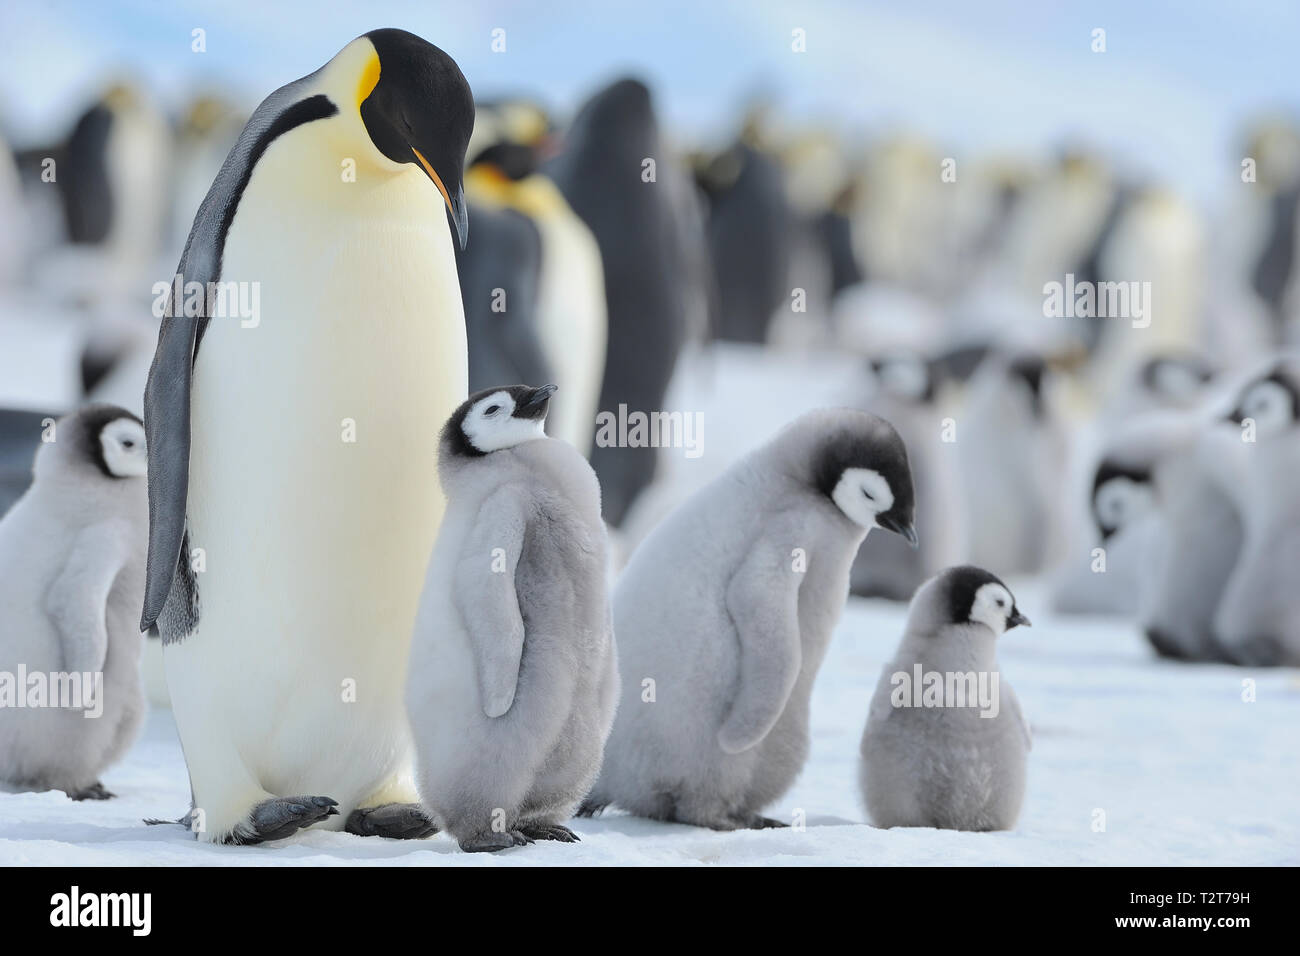 Emperor penguins, Aptenodytes forsteri, Penguin Colony with Adults and Chicks, Snow Hill Island, Antartic Peninsula, Antarctica Stock Photo